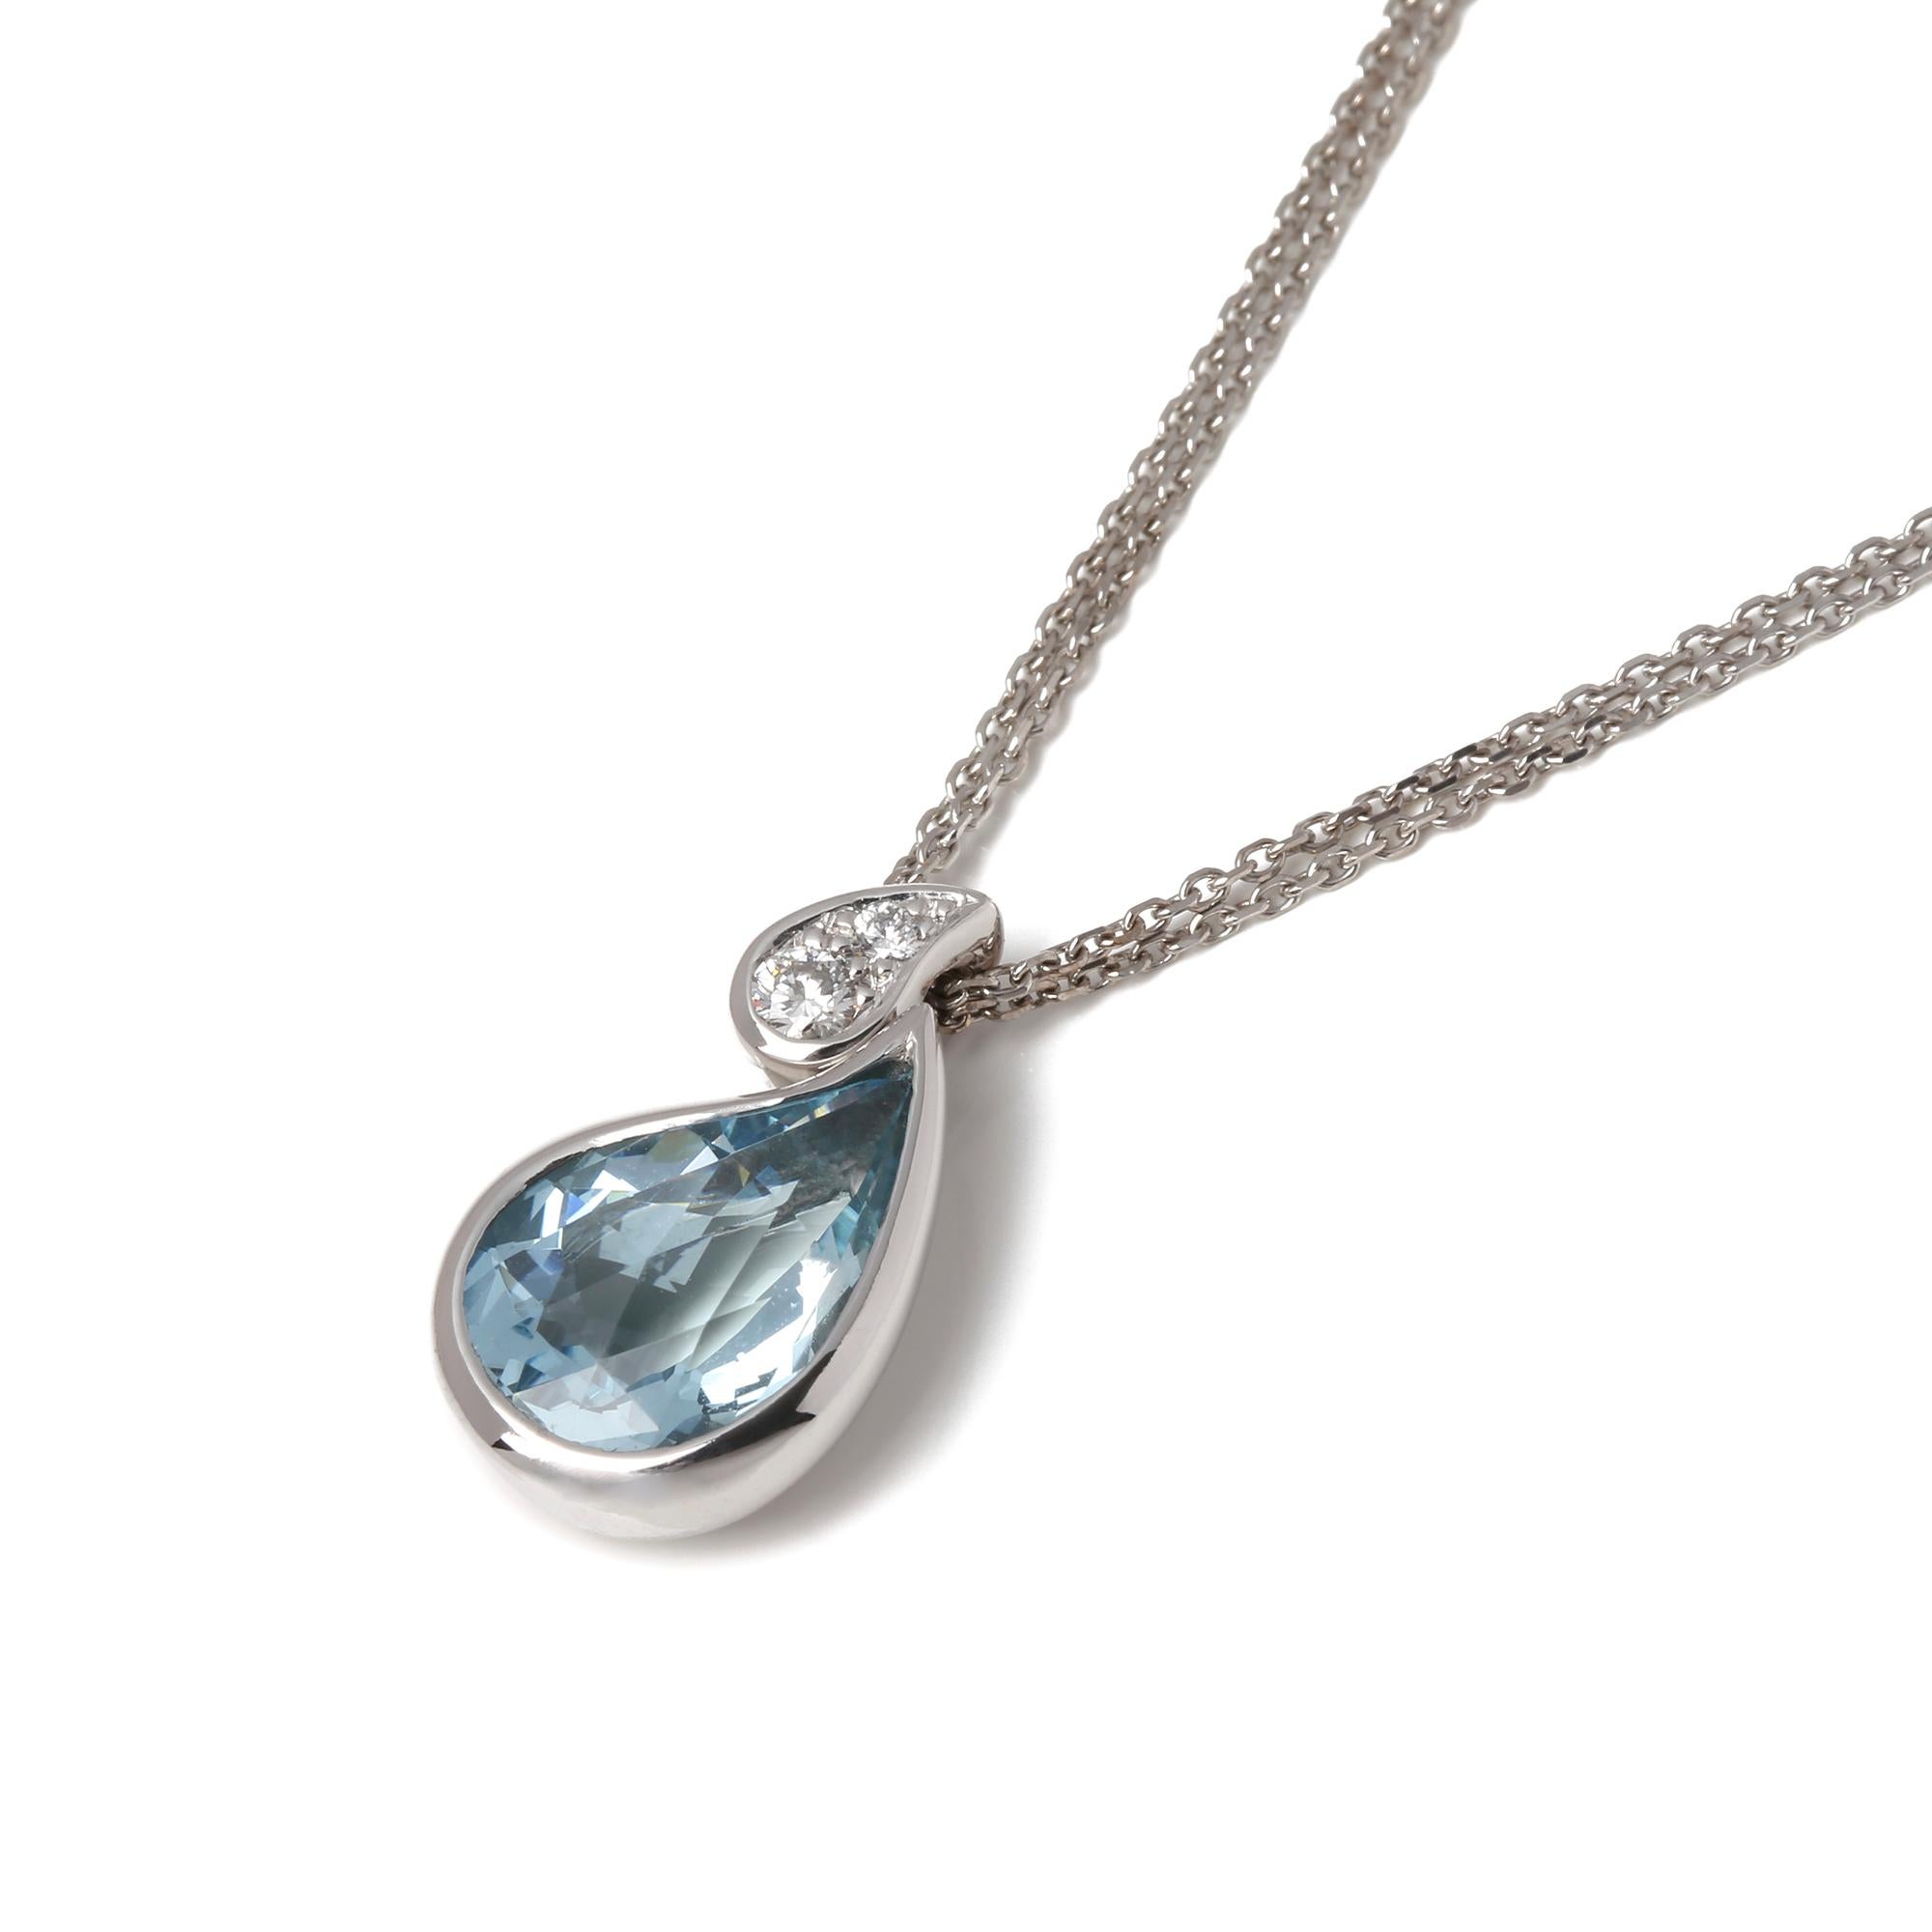 This necklace by Boodles features Aquamarine and Diamond, made in 18k white gold. Accompanied with a Boodles box. Our Xupes reference is J708 should you need to quote this. 